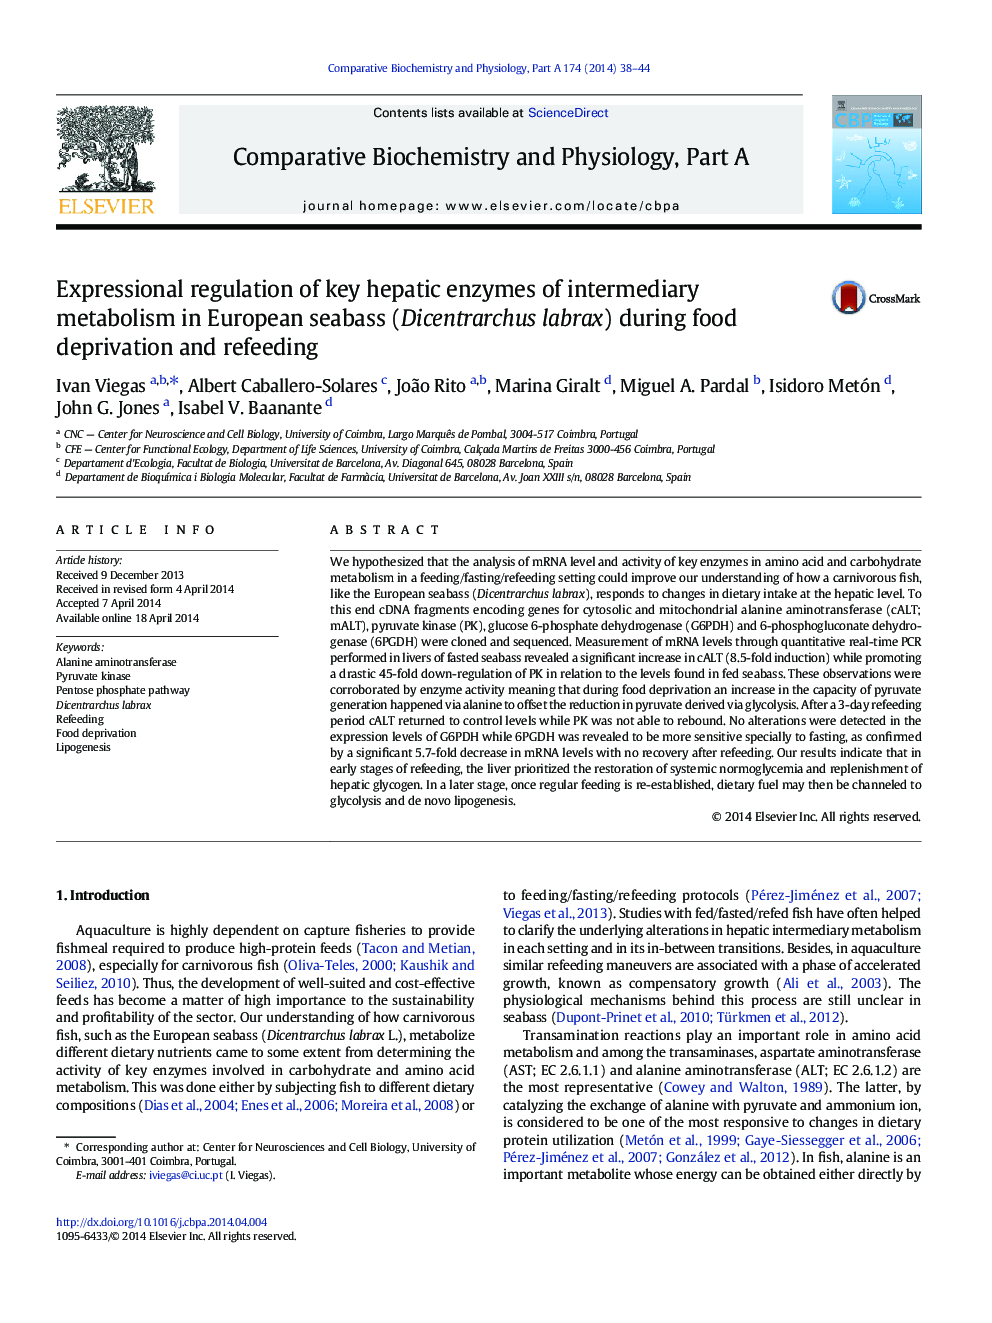 Expressional regulation of key hepatic enzymes of intermediary metabolism in European seabass (Dicentrarchus labrax) during food deprivation and refeeding